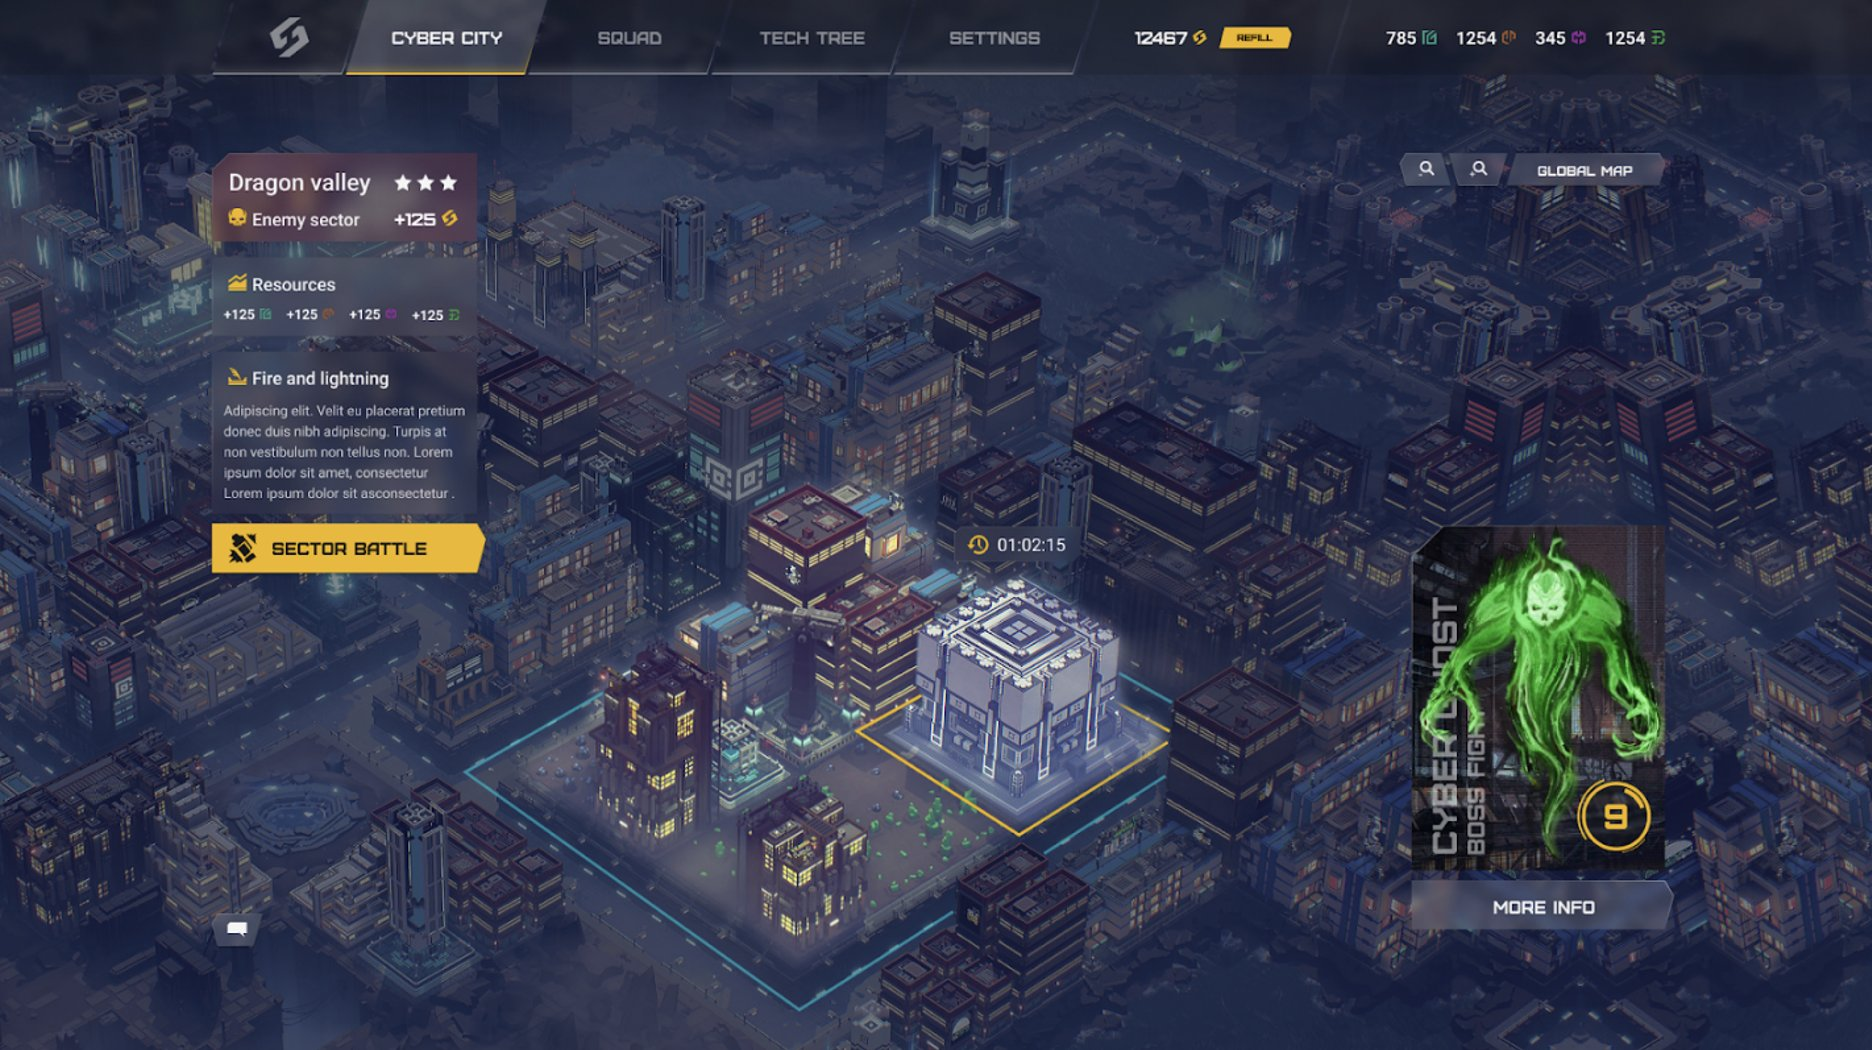 game image from Cyber City